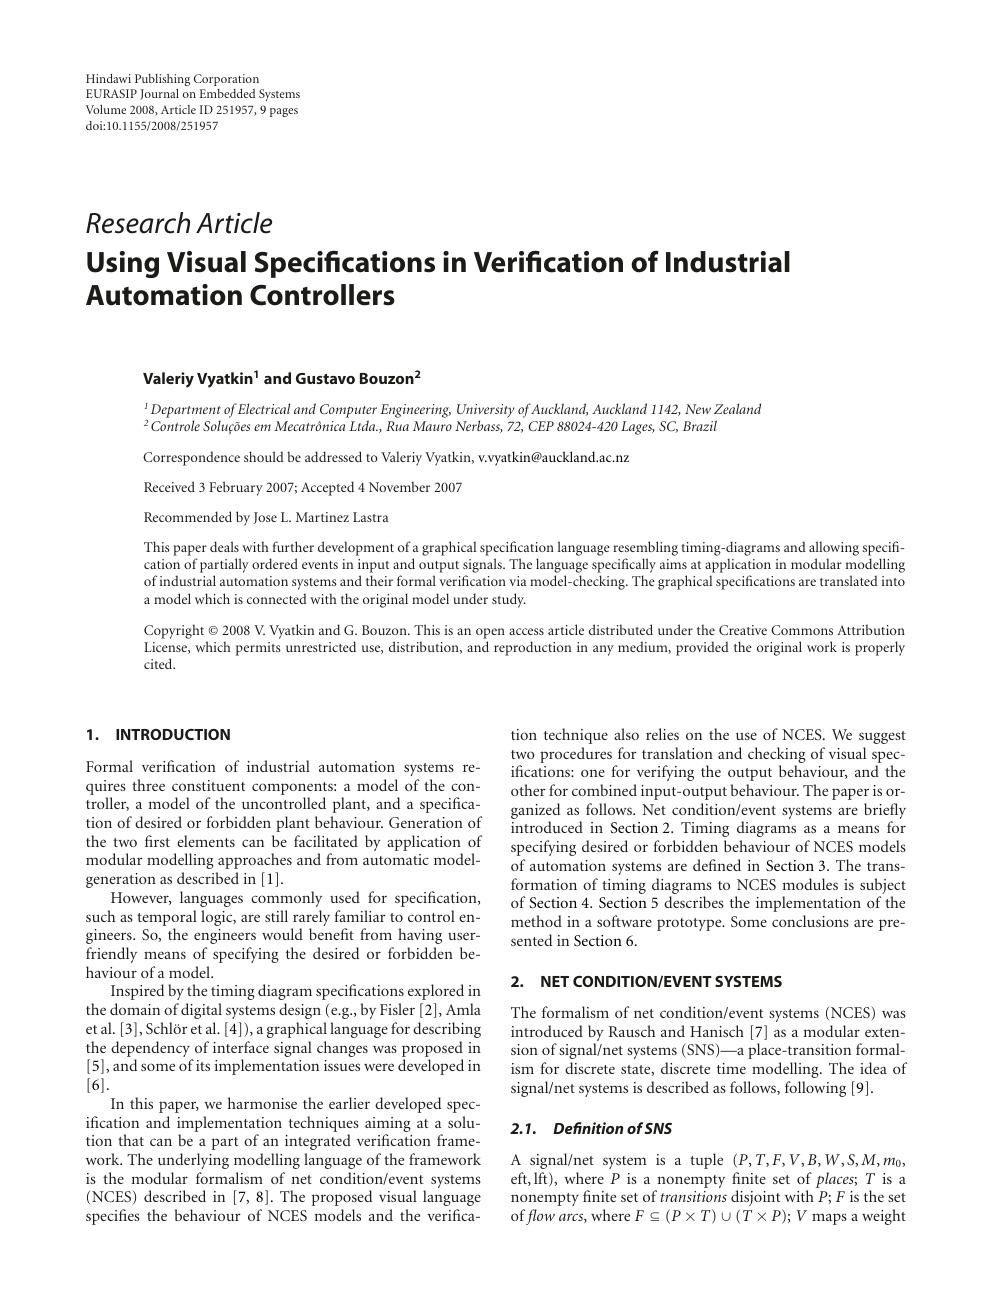 Using Visual Specifications In Verification Of Industrial Automation Controllers Topic Of Research Paper In Electrical Engineering Electronic Engineering Information Engineering Download Scholarly Article Pdf And Read For Free On Cyberleninka Open